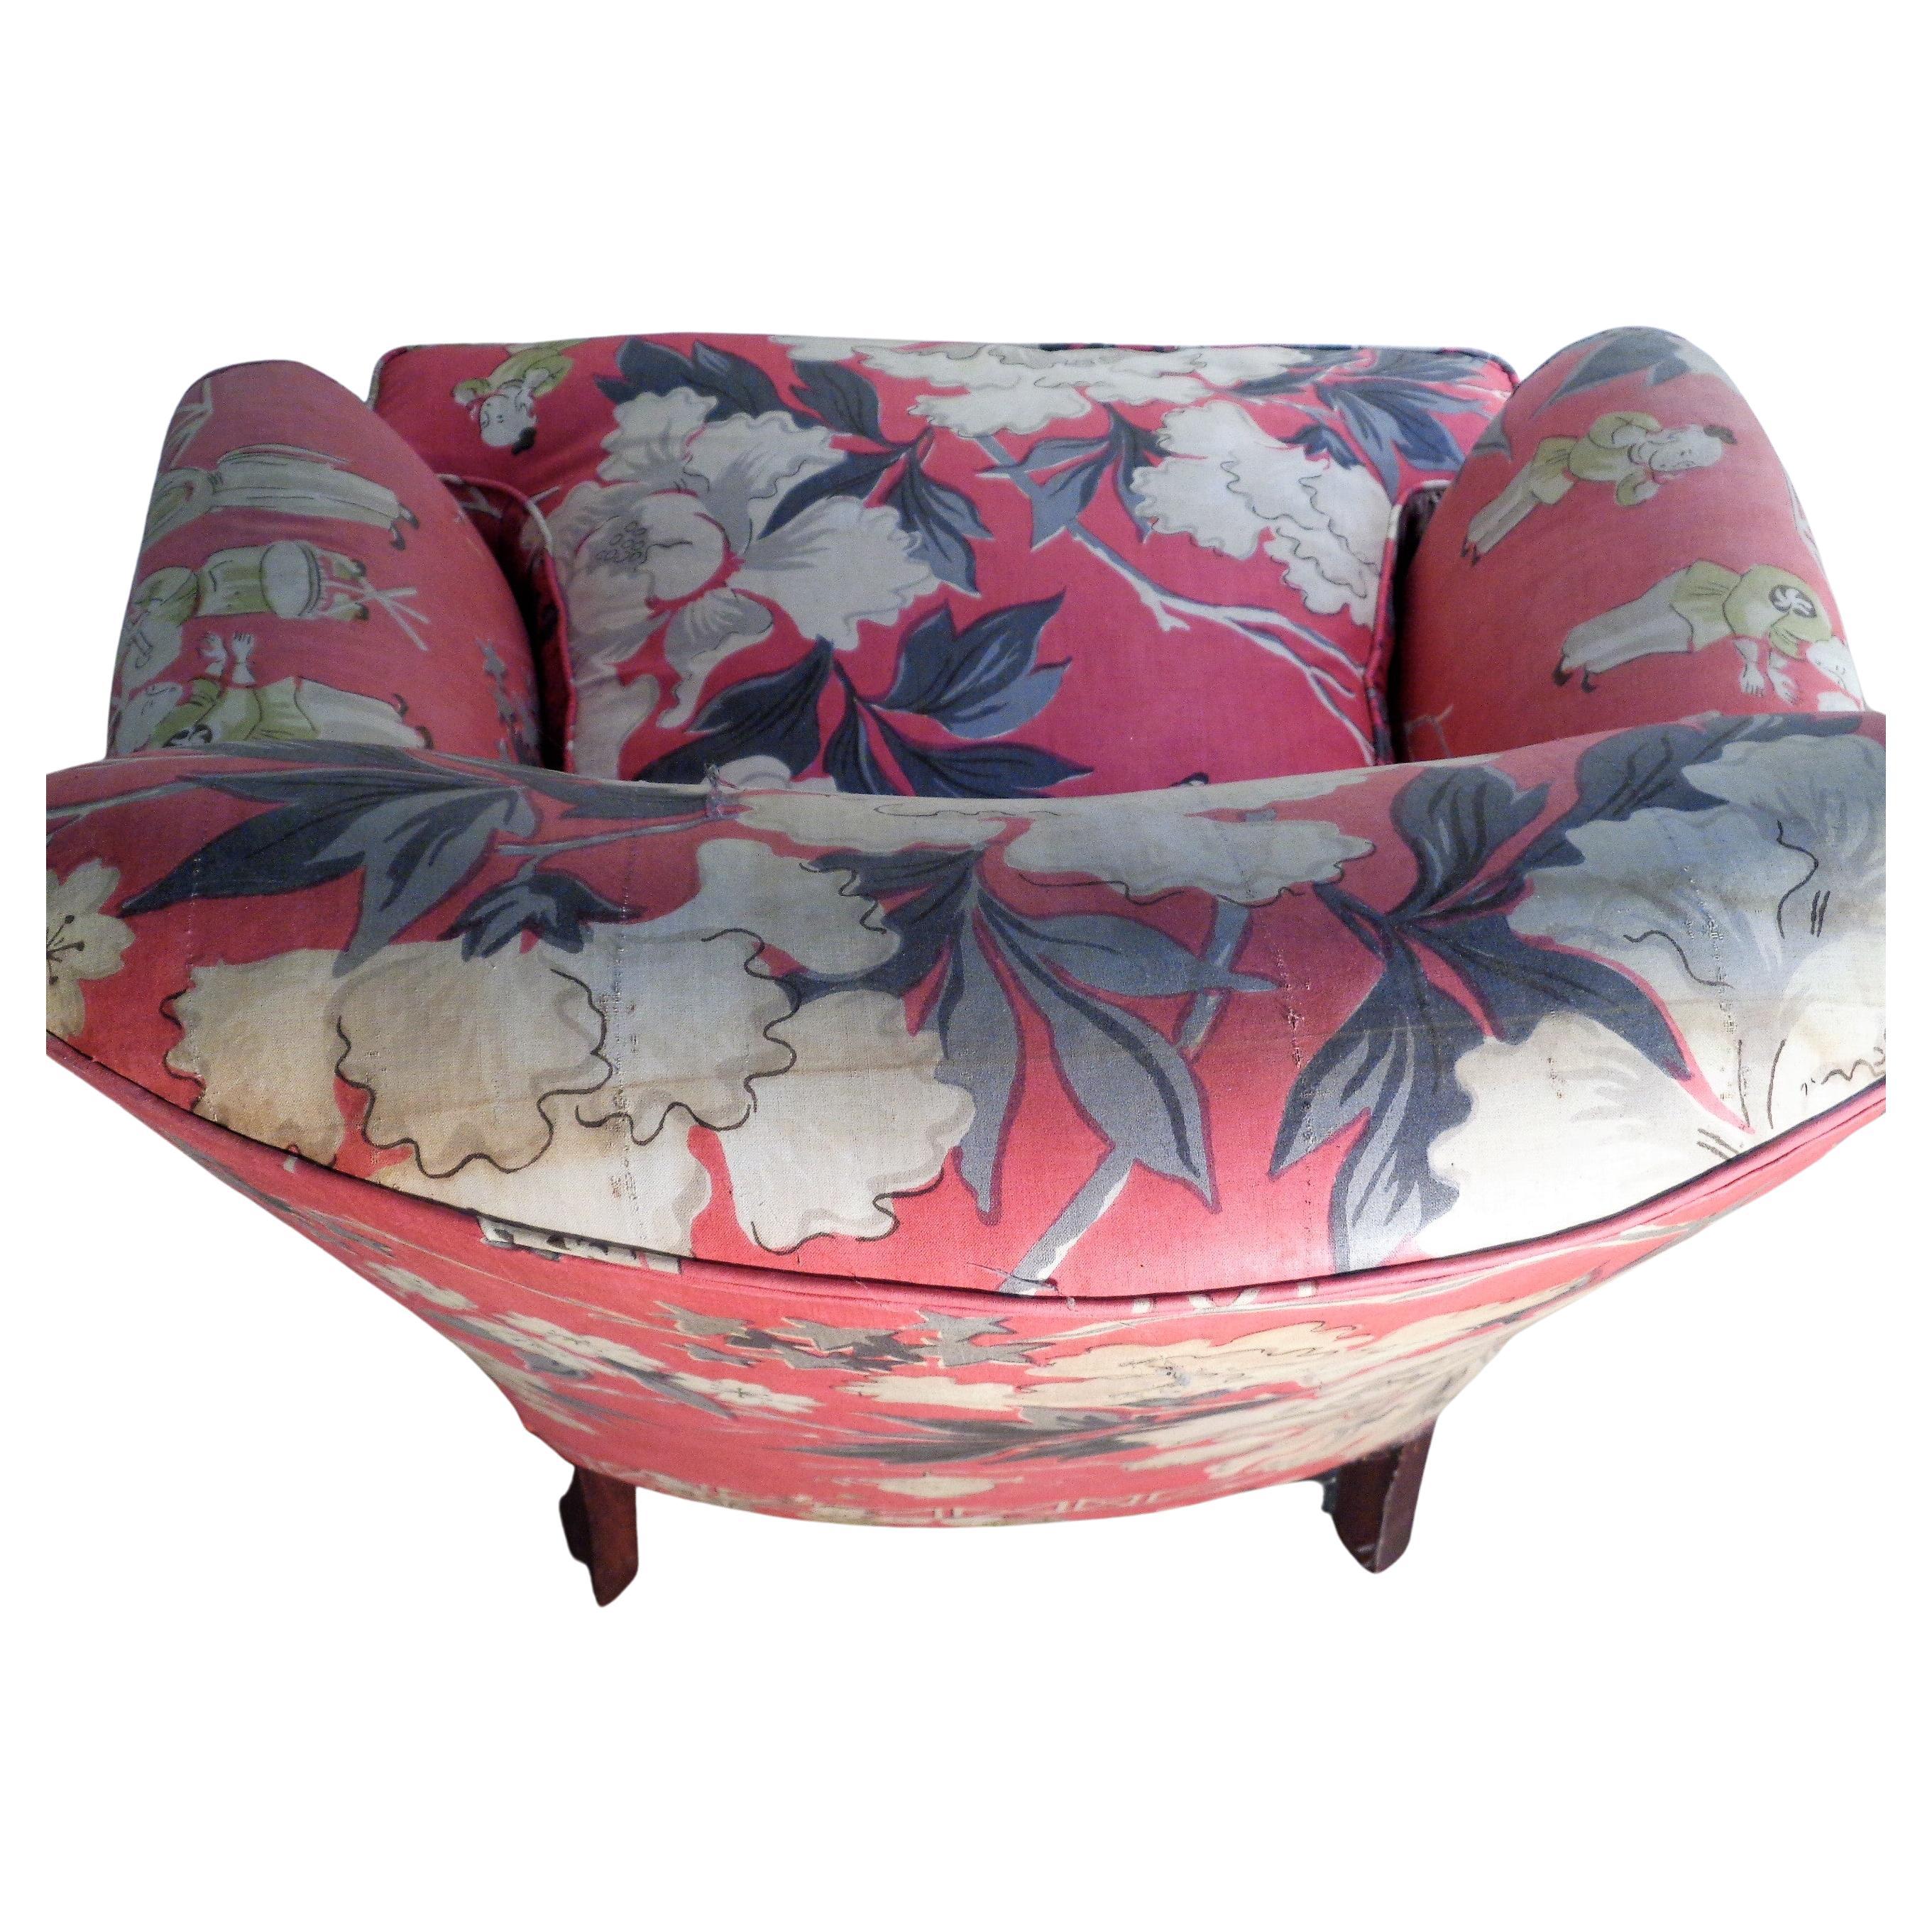  Dorothy Draper Style Original Chinoiserie Upholstered Lounge Chair, 1940's For Sale 6